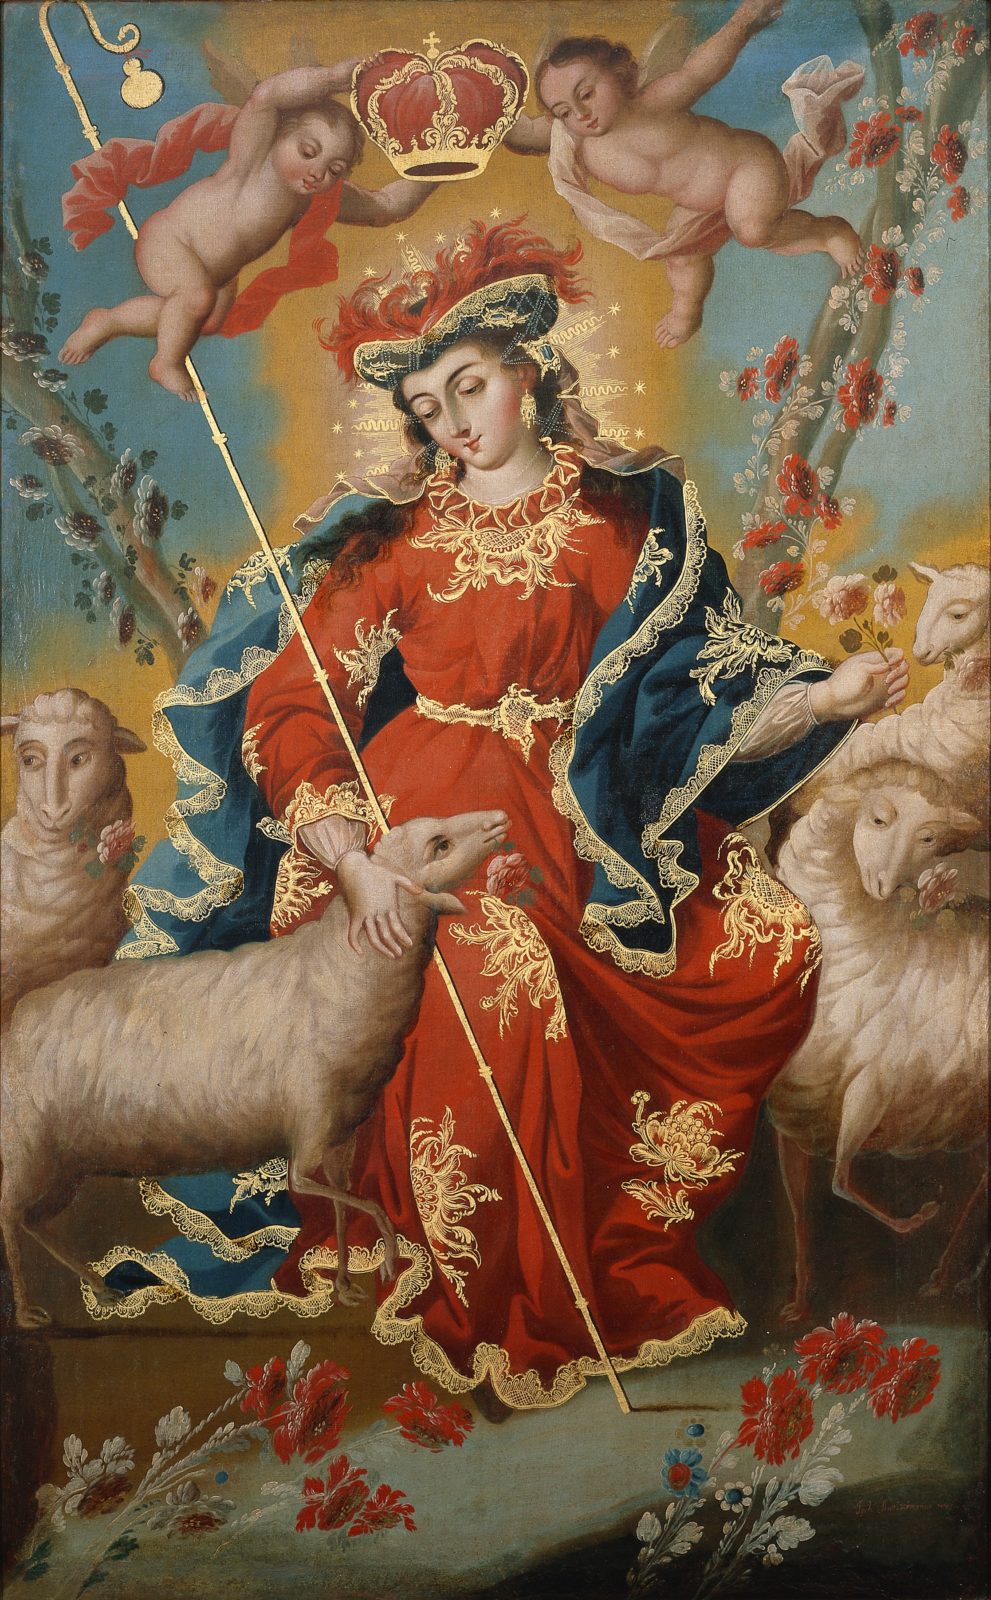 A painting depicting the Virgin Mary as a holy shepherdess.